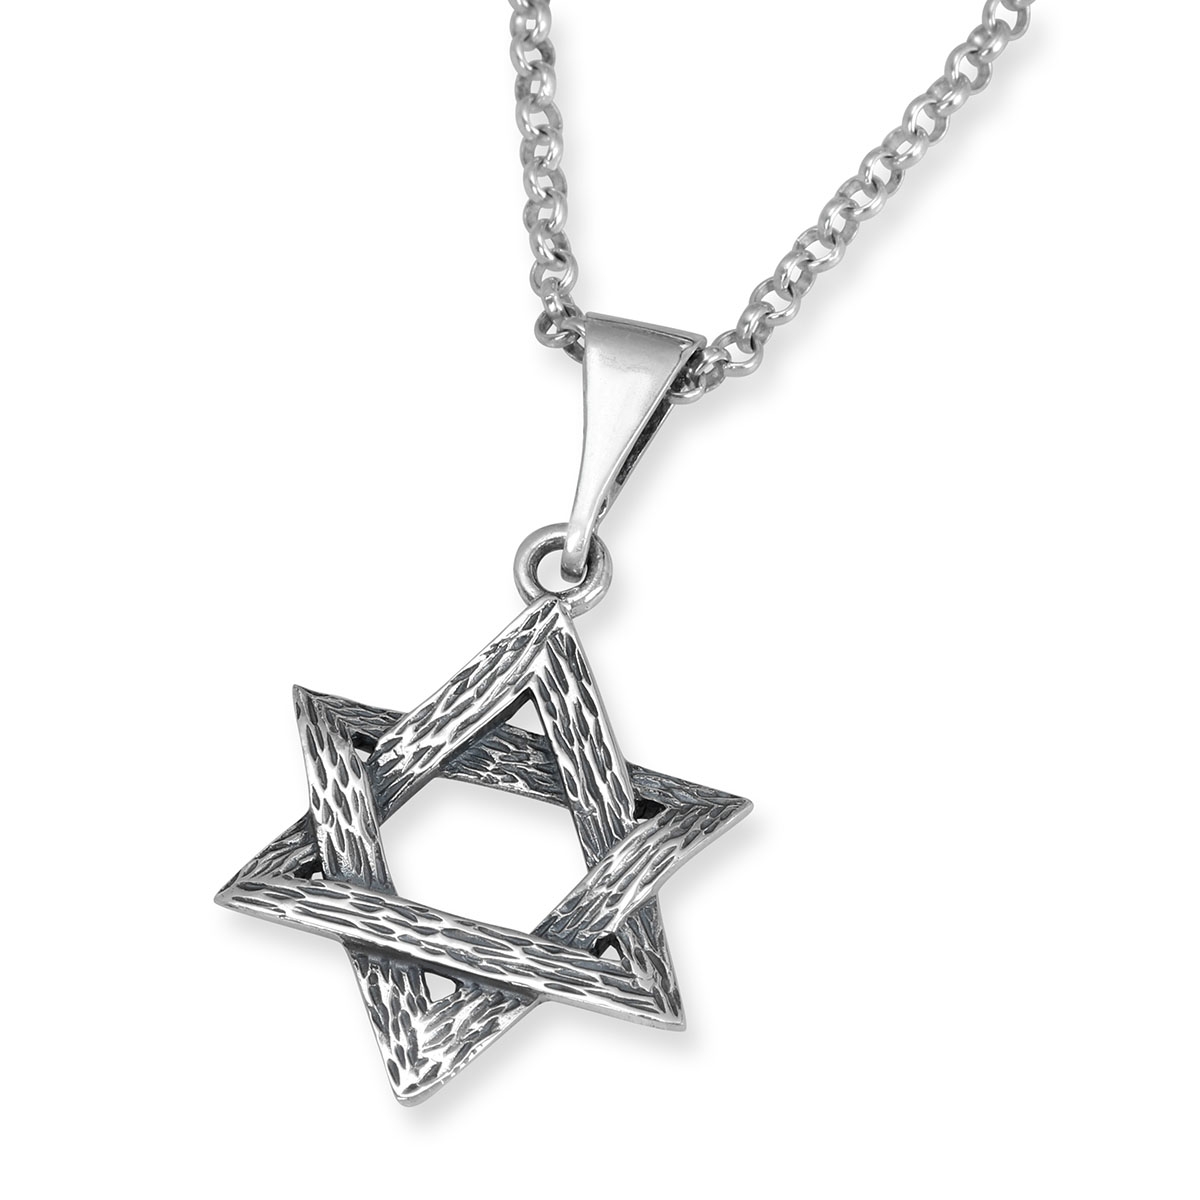 Large Sterling Silver Interlocked Star of David Necklace - 1